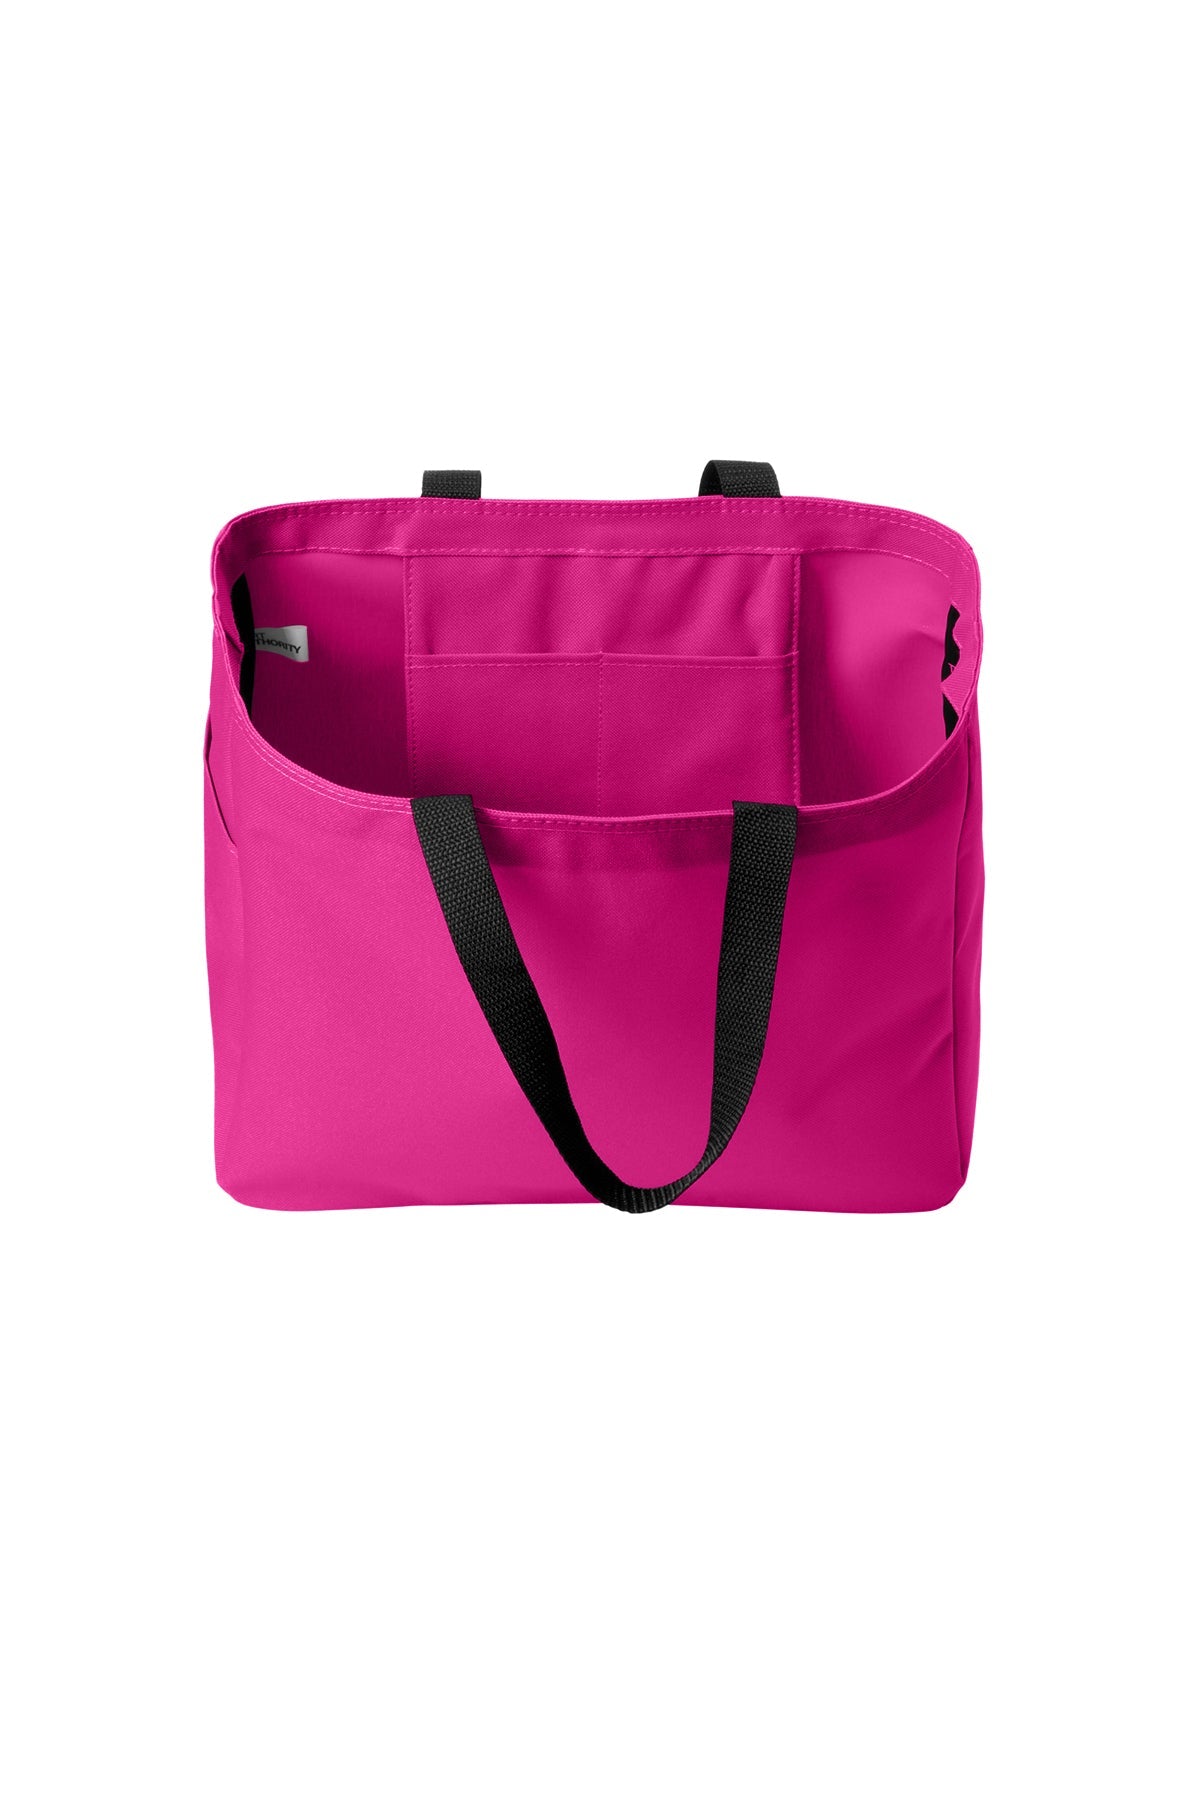 Port Authority - Essential Customized Tote, Tropical Pink